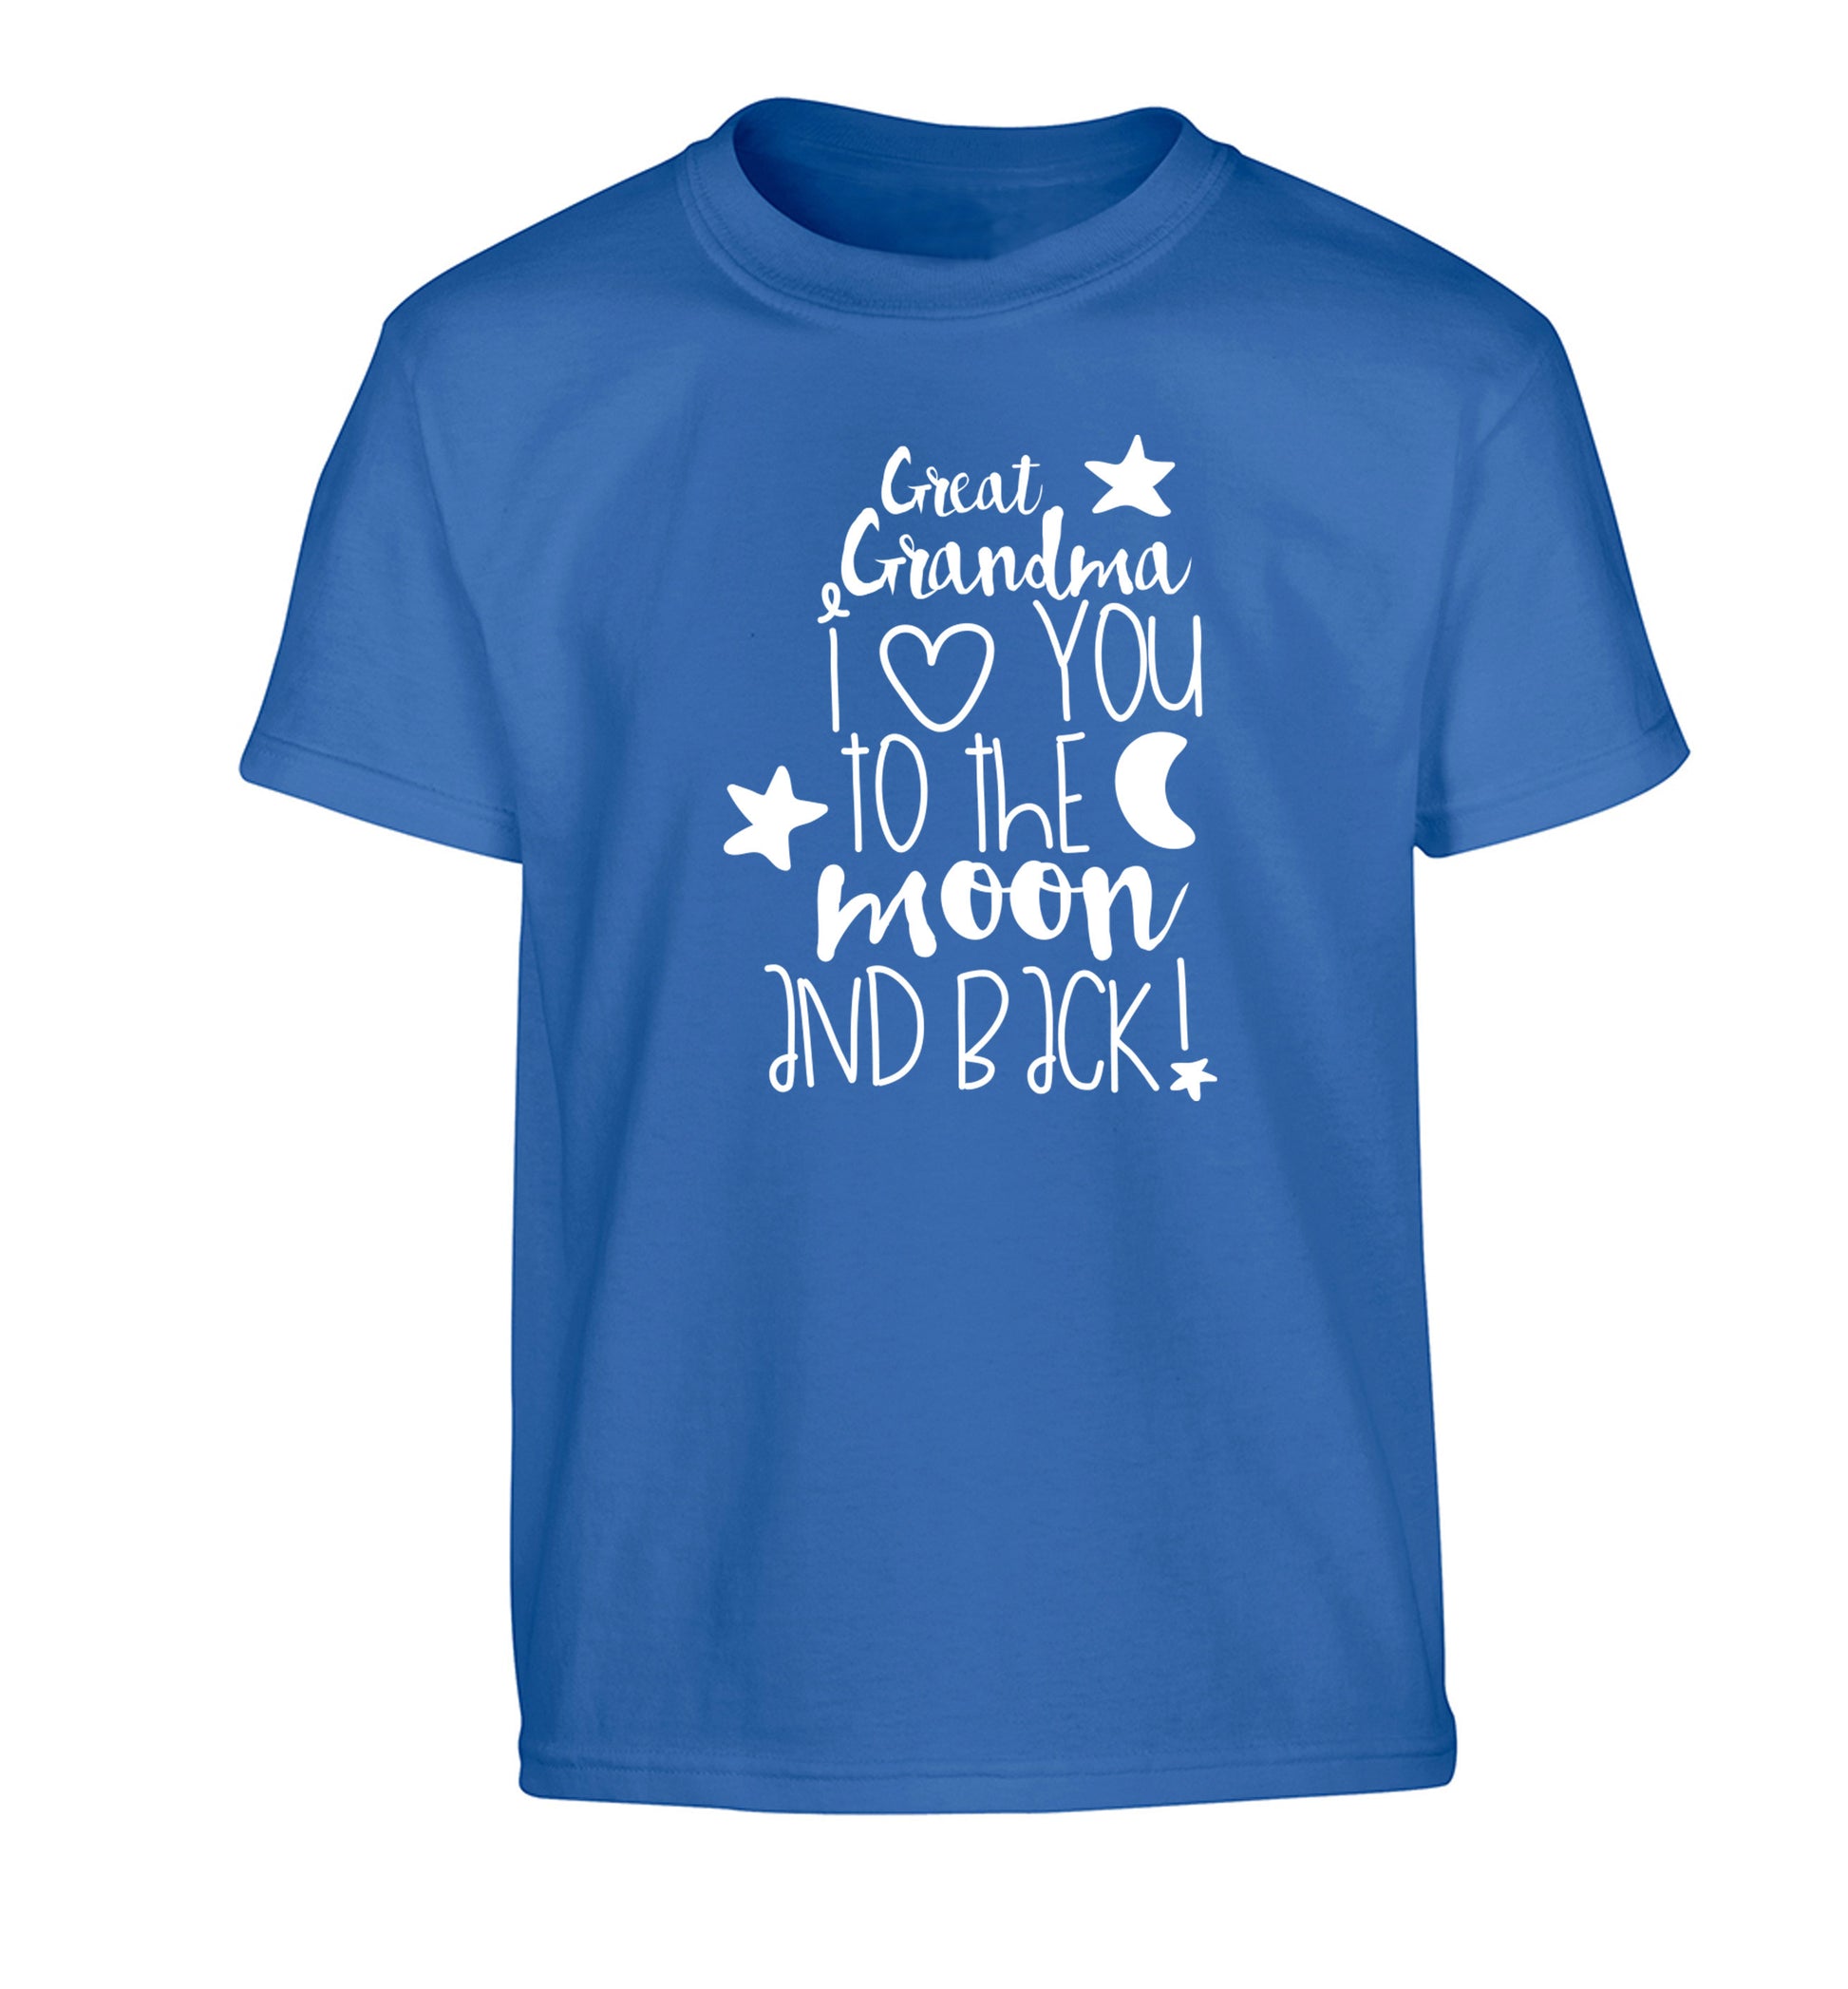 Great Grandma I love you to the moon and back Children's blue Tshirt 12-14 Years